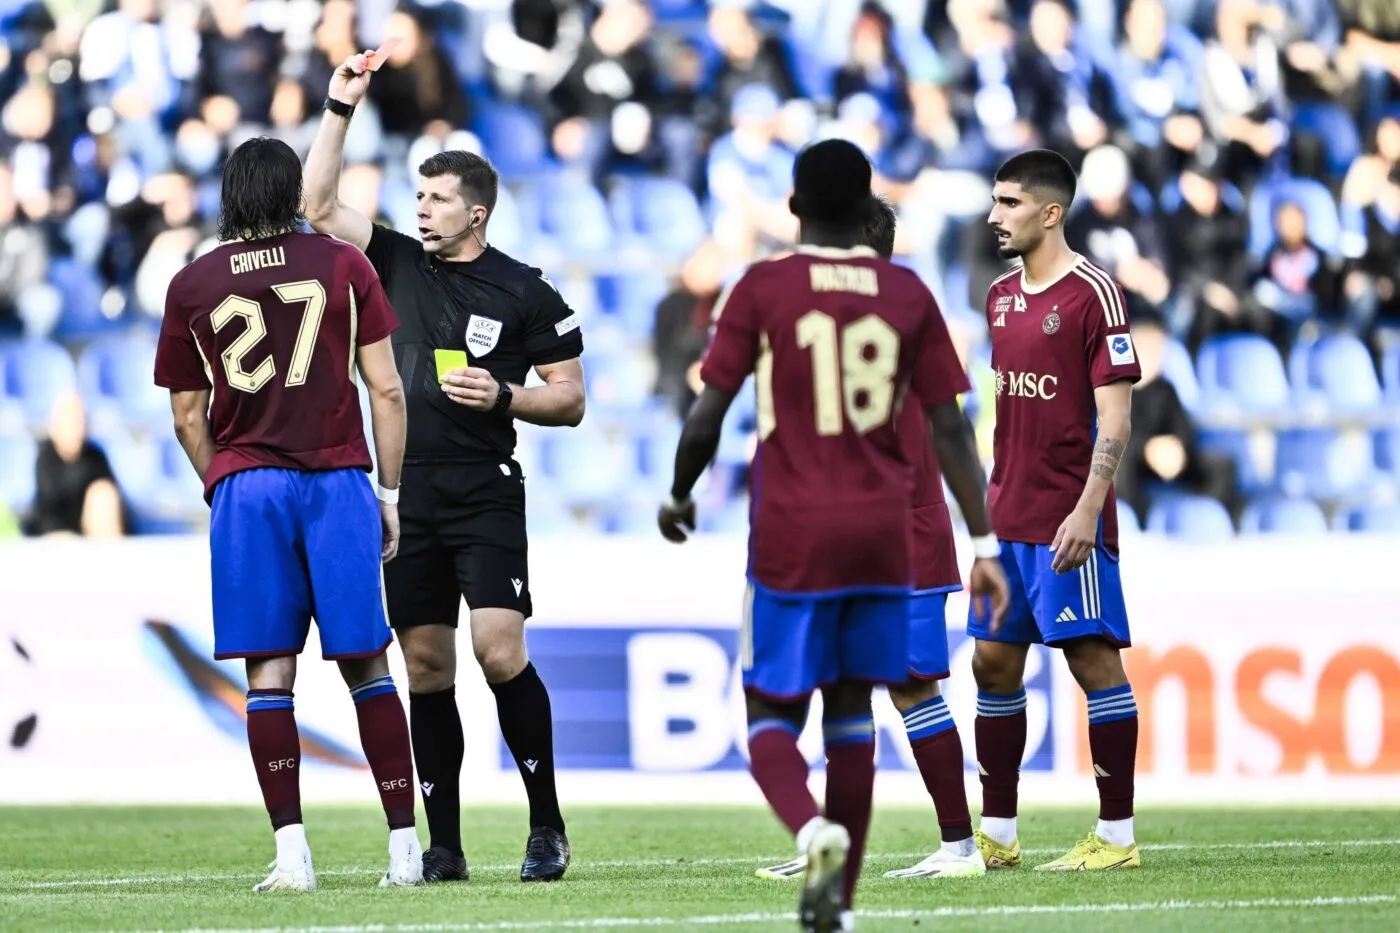 Servette's Enzo Crivelli receives a red card during a soccer game between Belgian KRC Genk and Swiss Servette FC, Wednesday 02 August 2023 in Genk, the first leg of the second qualifying round for the UEFA Champions League competition. BELGA PHOTO JOHAN EYCKENS - Photo by Icon sport